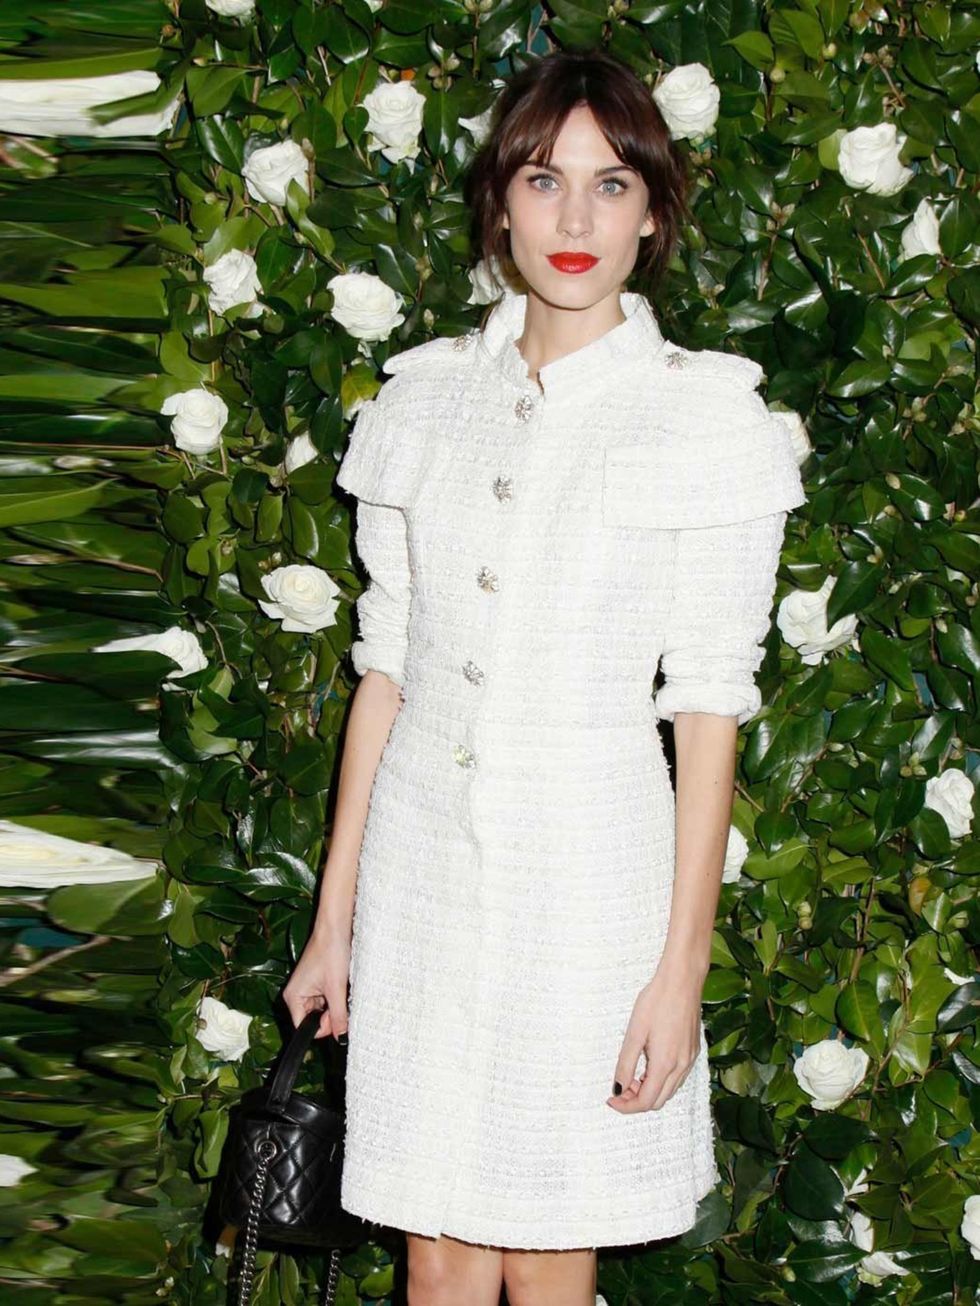 <p><strong>Alexa Chung</strong></p><p>Namesake of the label's most successful bag and a mainstay of its front row, she's practically part of the Mulberry family. A natural fit.</p>